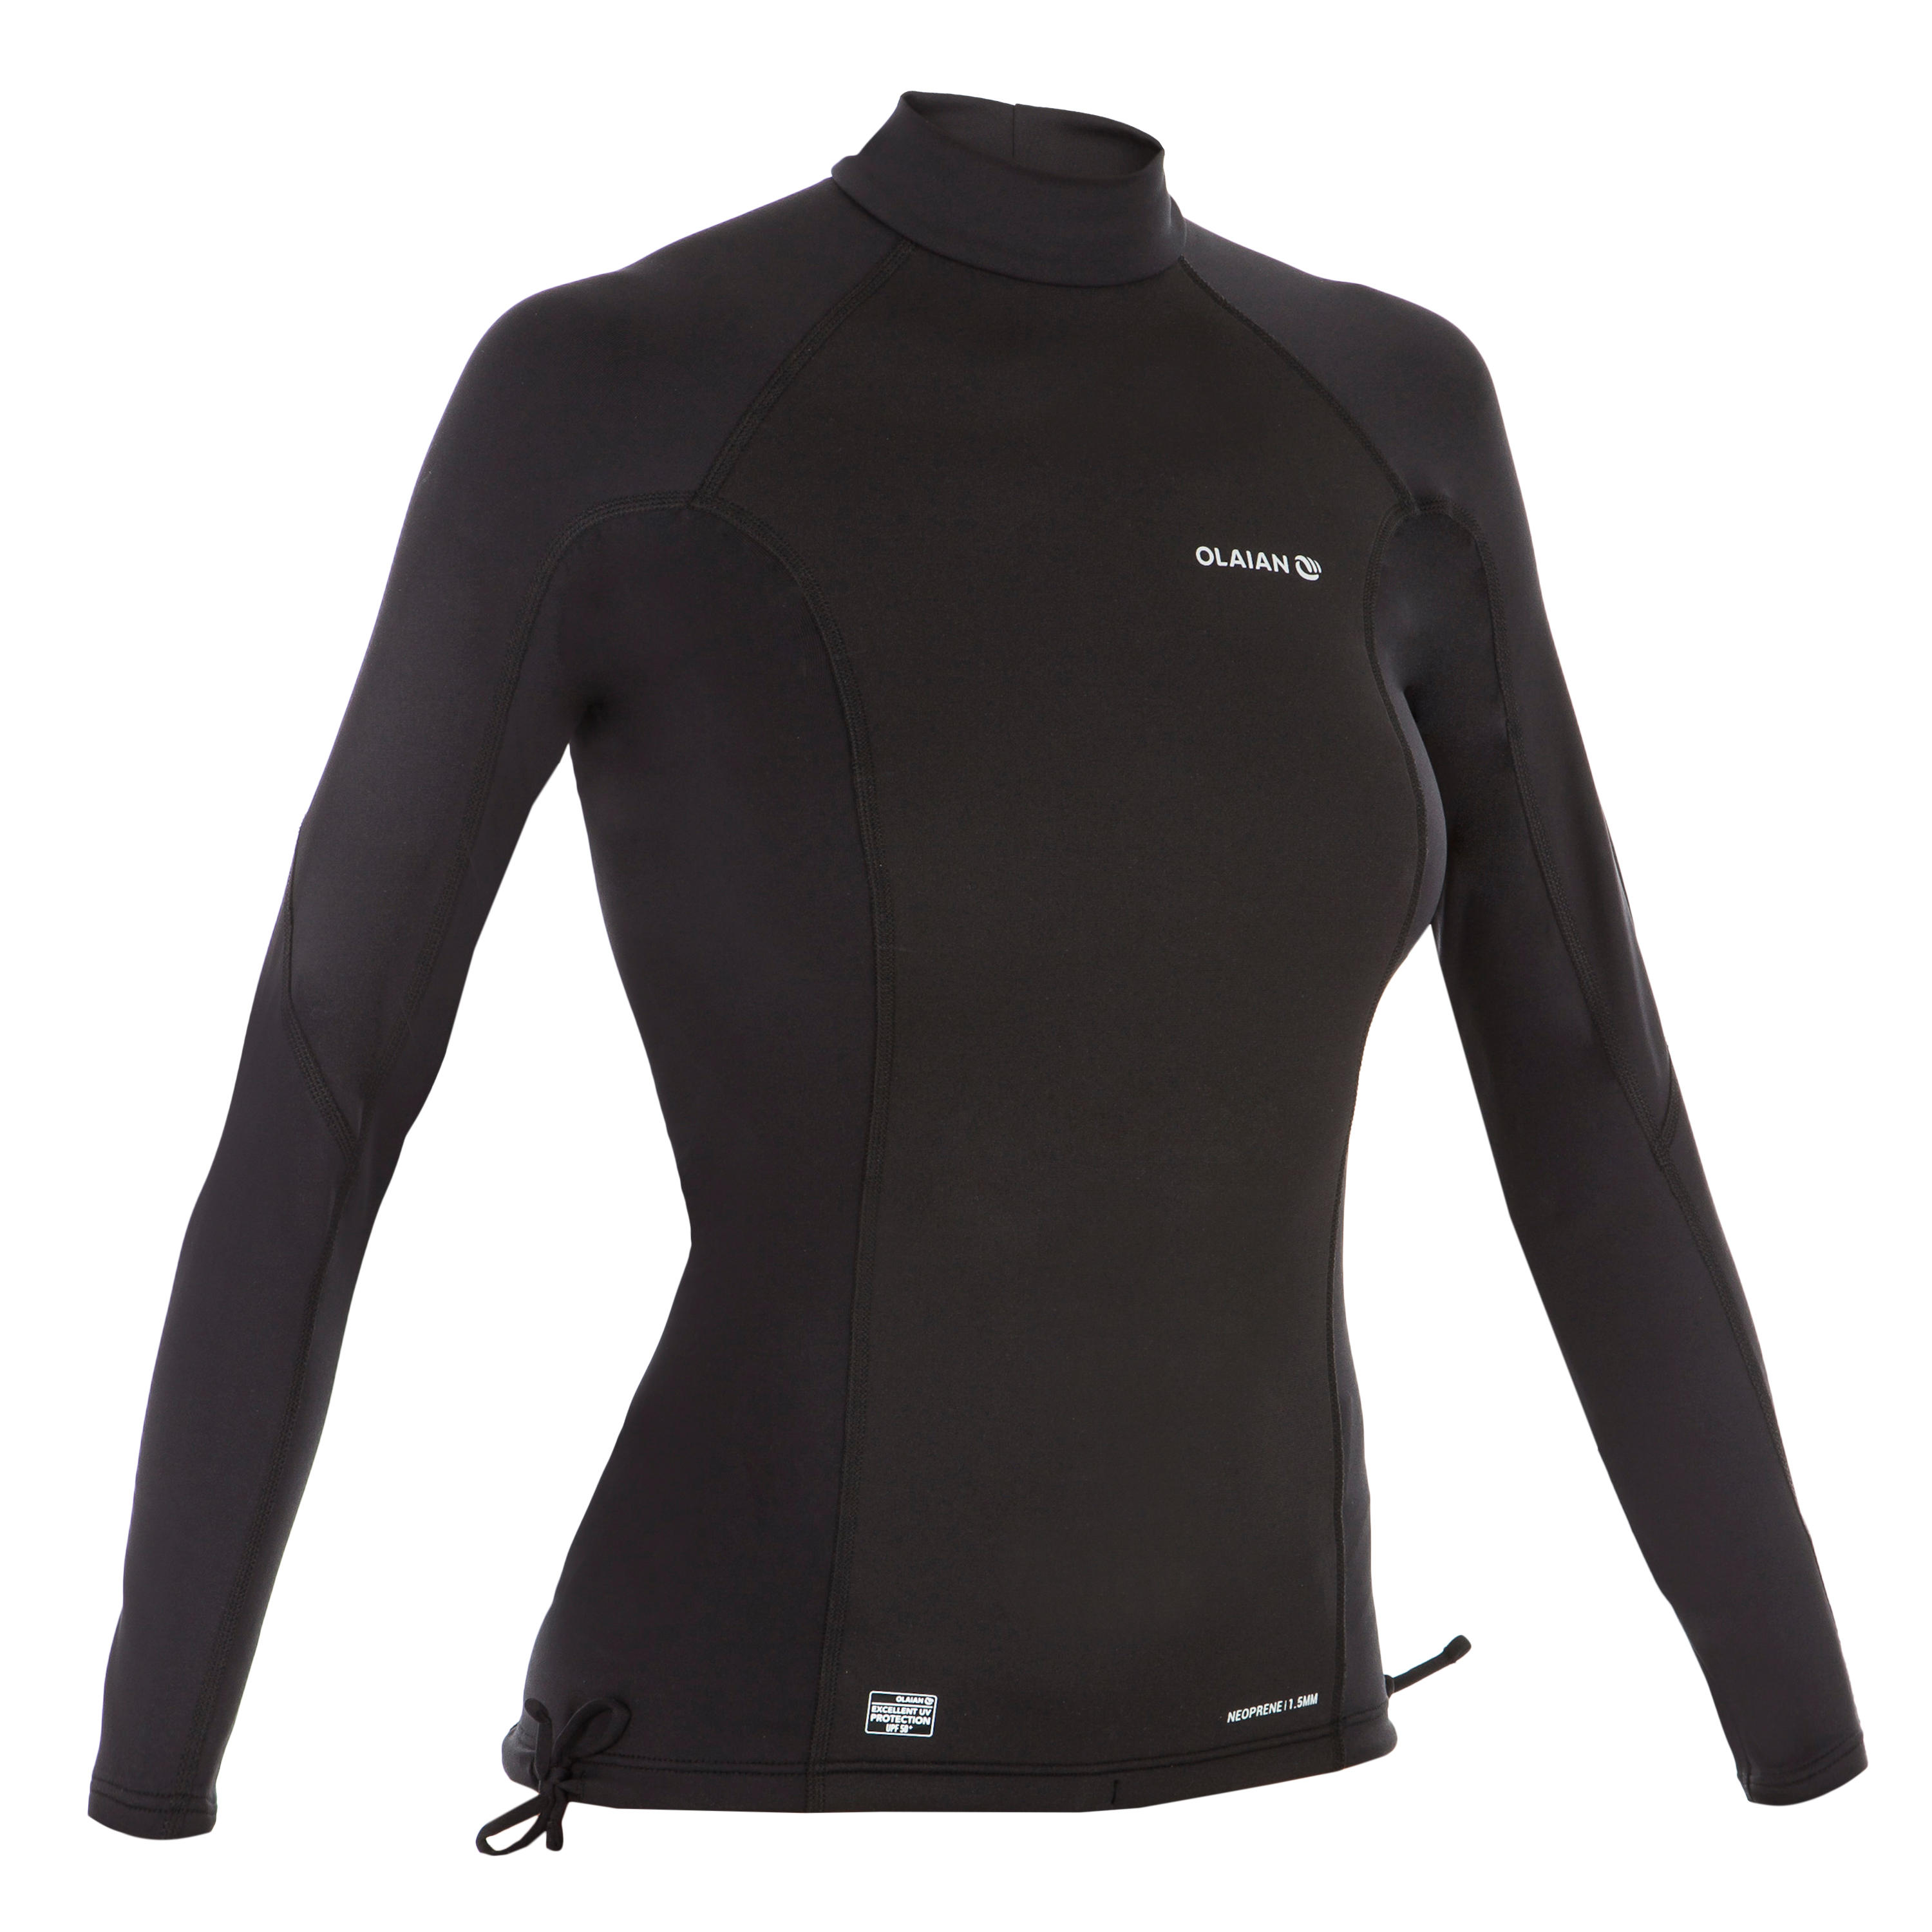 Under Armour Greyton Skinsuit Full Body suit Compression Surfing rash Guard